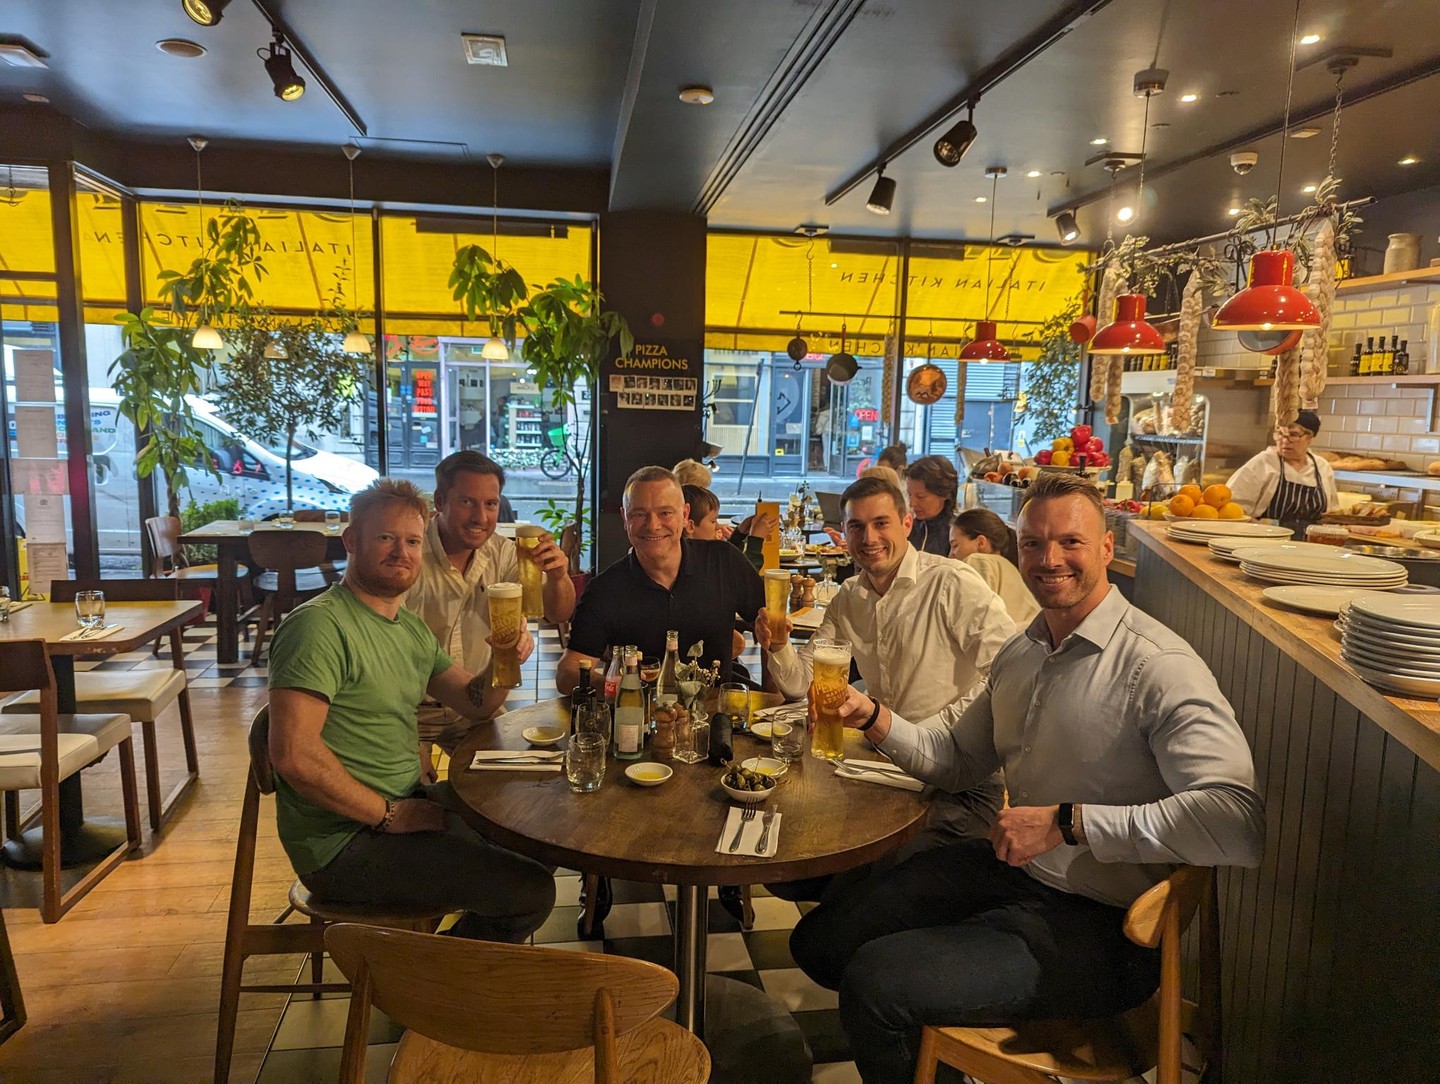 Our remarkable super sales team in action during their well-deserved lunch break today! 🙌🥪💼 

Embracing both success and connection! 🌟 

#TeamworkMakesTheDreamWork #SalesSuperstars #fintech #fintechos #insidefintechos